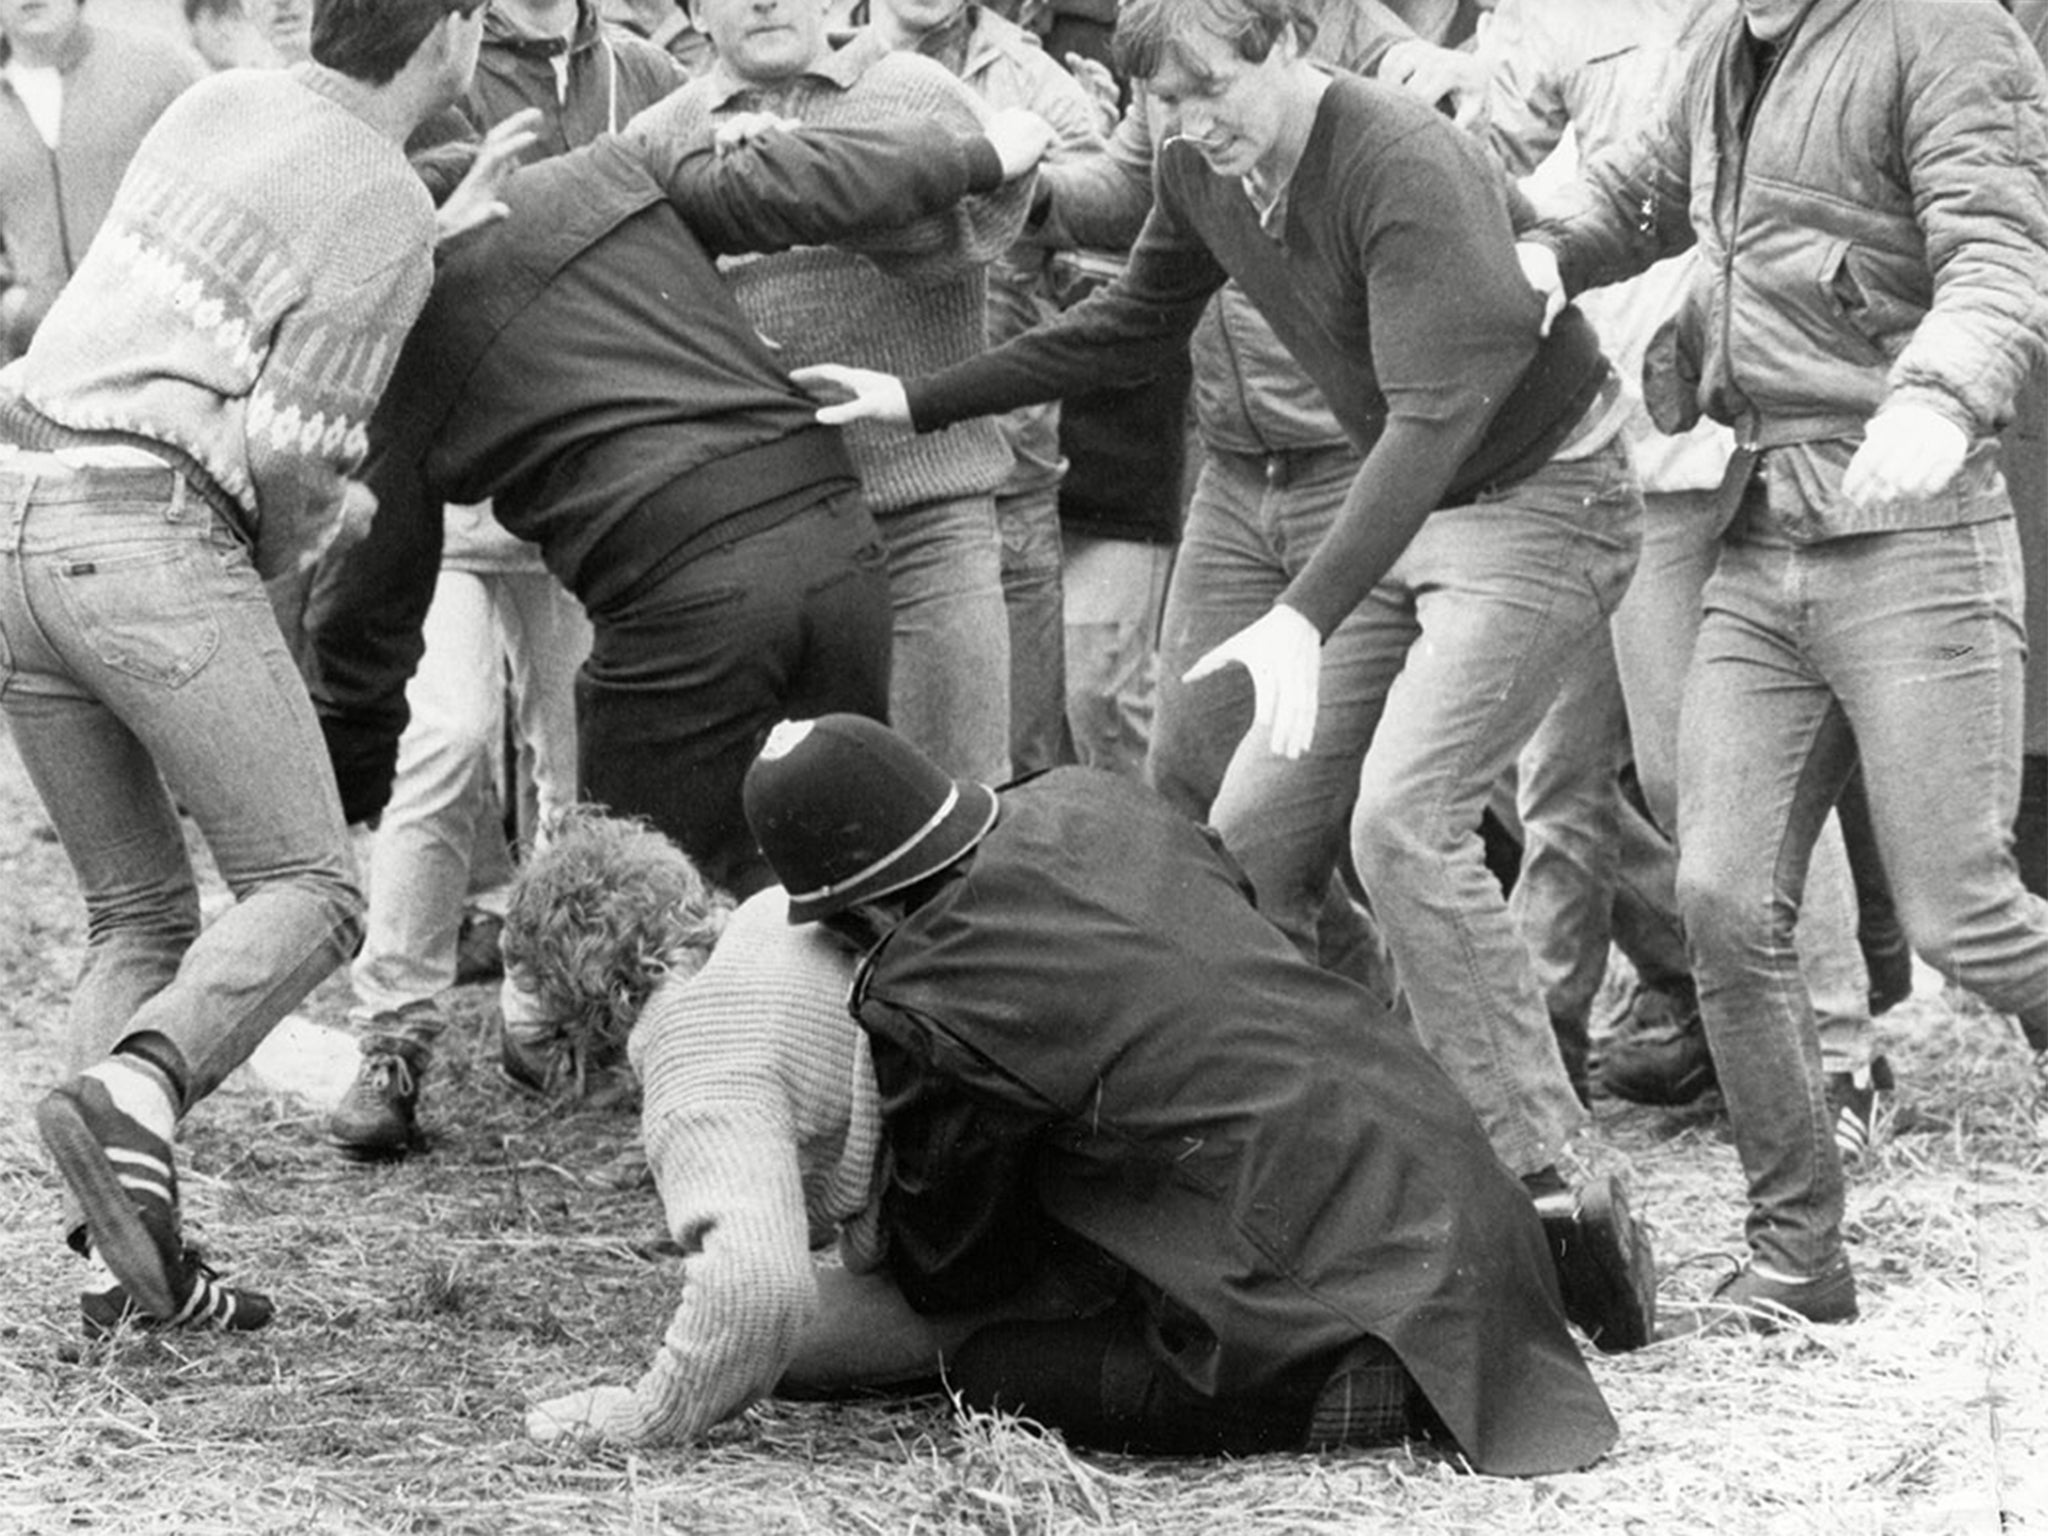 A police officer wrestles a miner to the ground during the violent confrontation in South Yorkshire on 18 June 1984